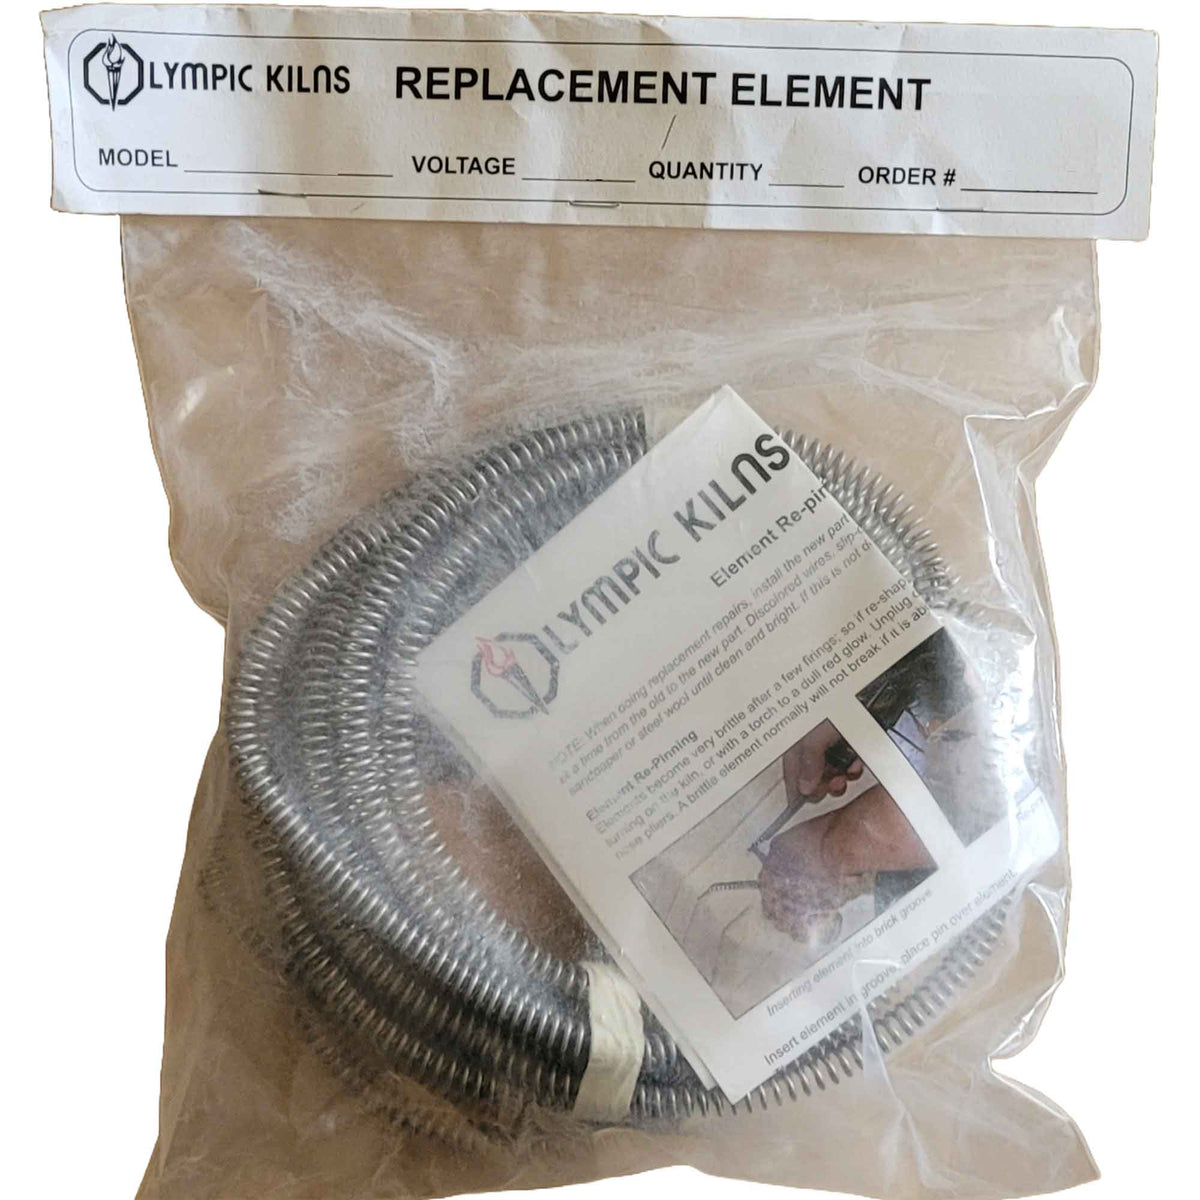 Olympic Kiln Replacement Element for Model 2323 or 2323H